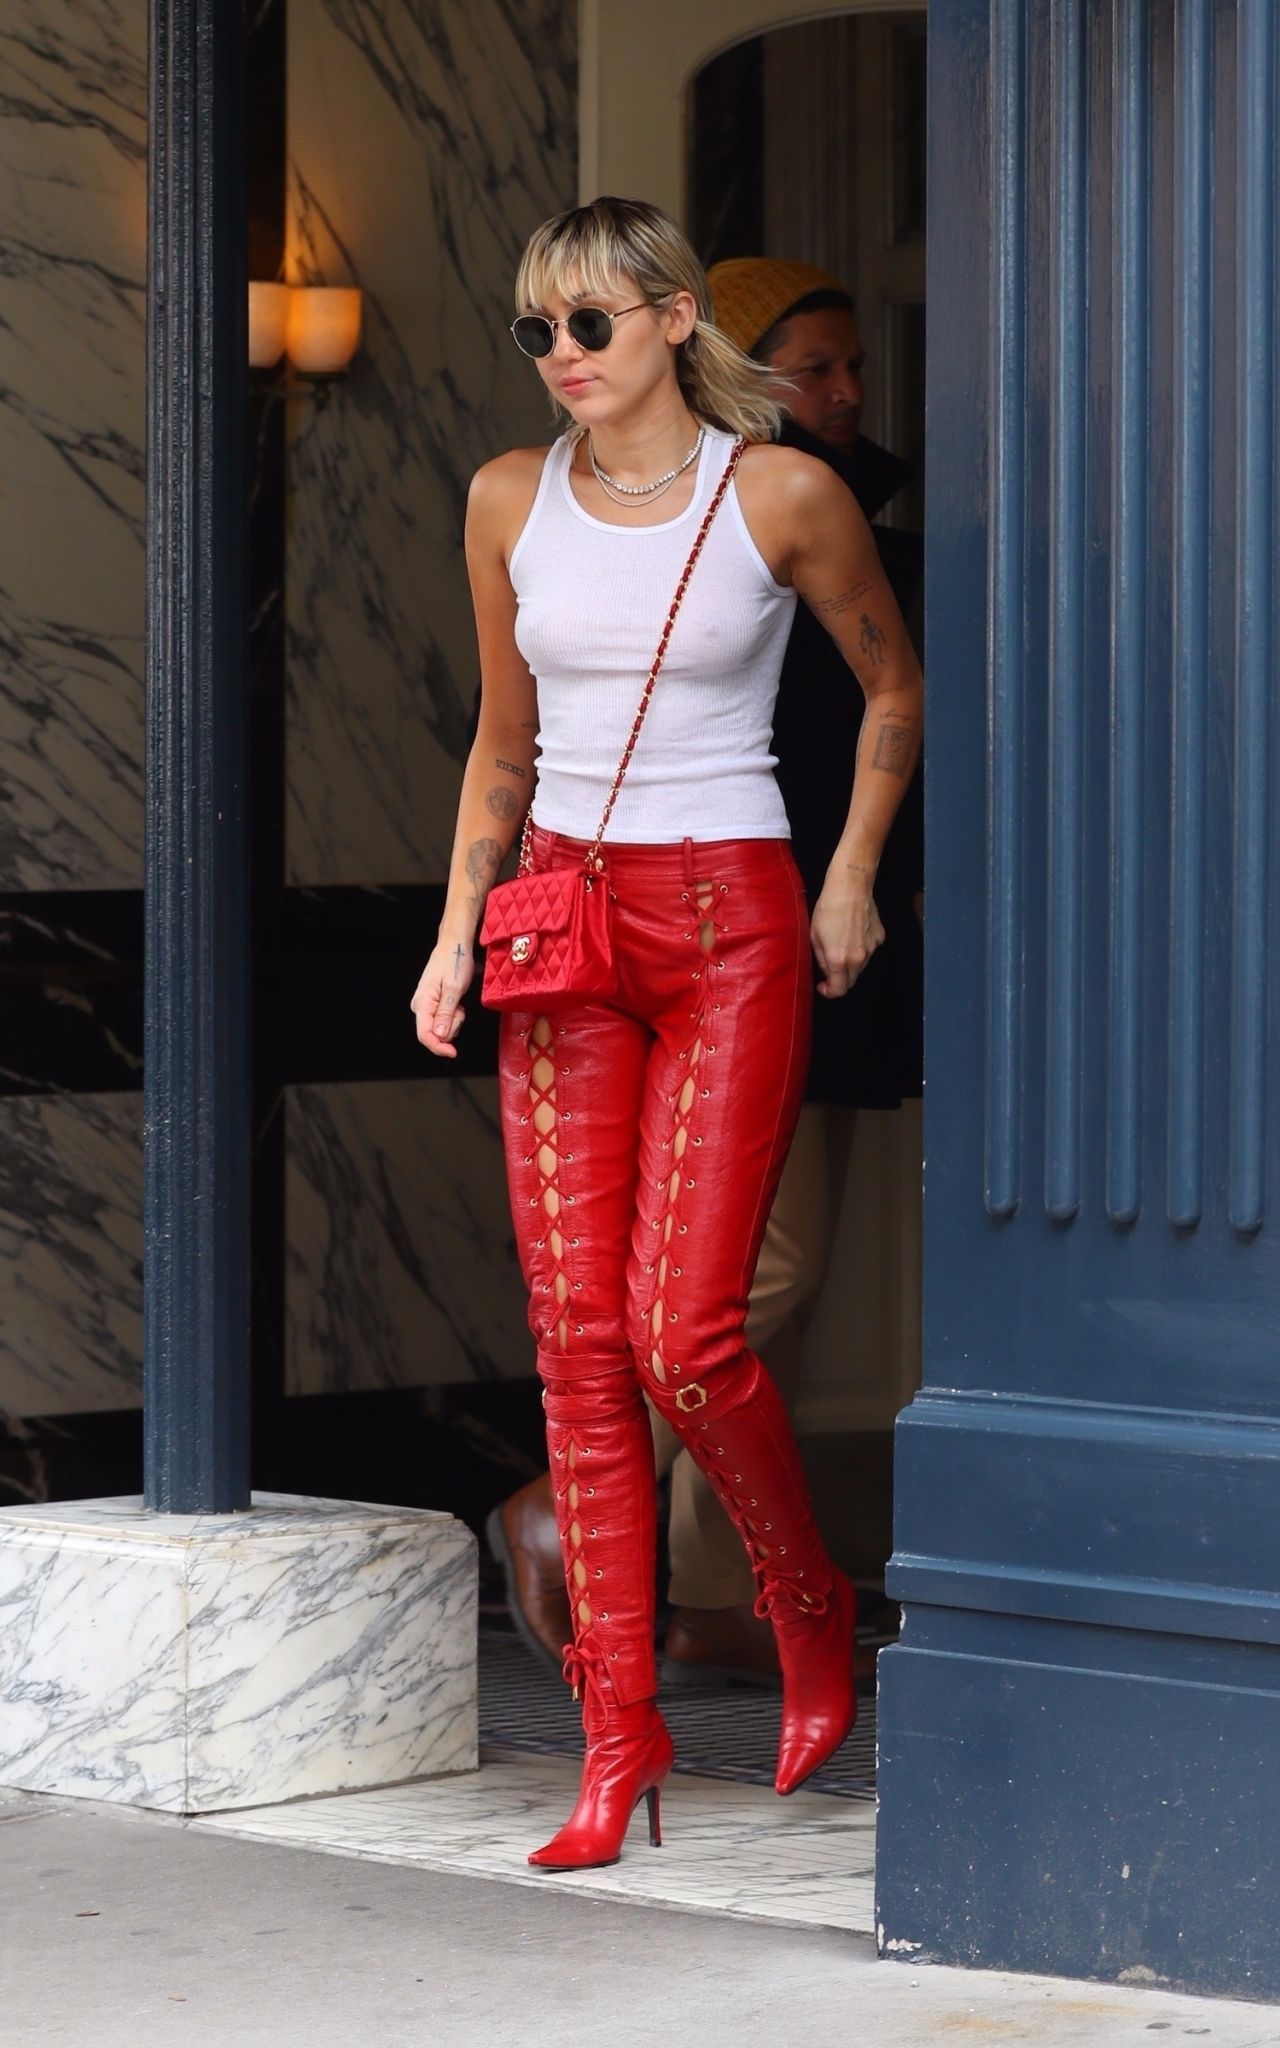 Miley Cyrus Redefines Street Fashion with Edgy and Unapologetic Style ...